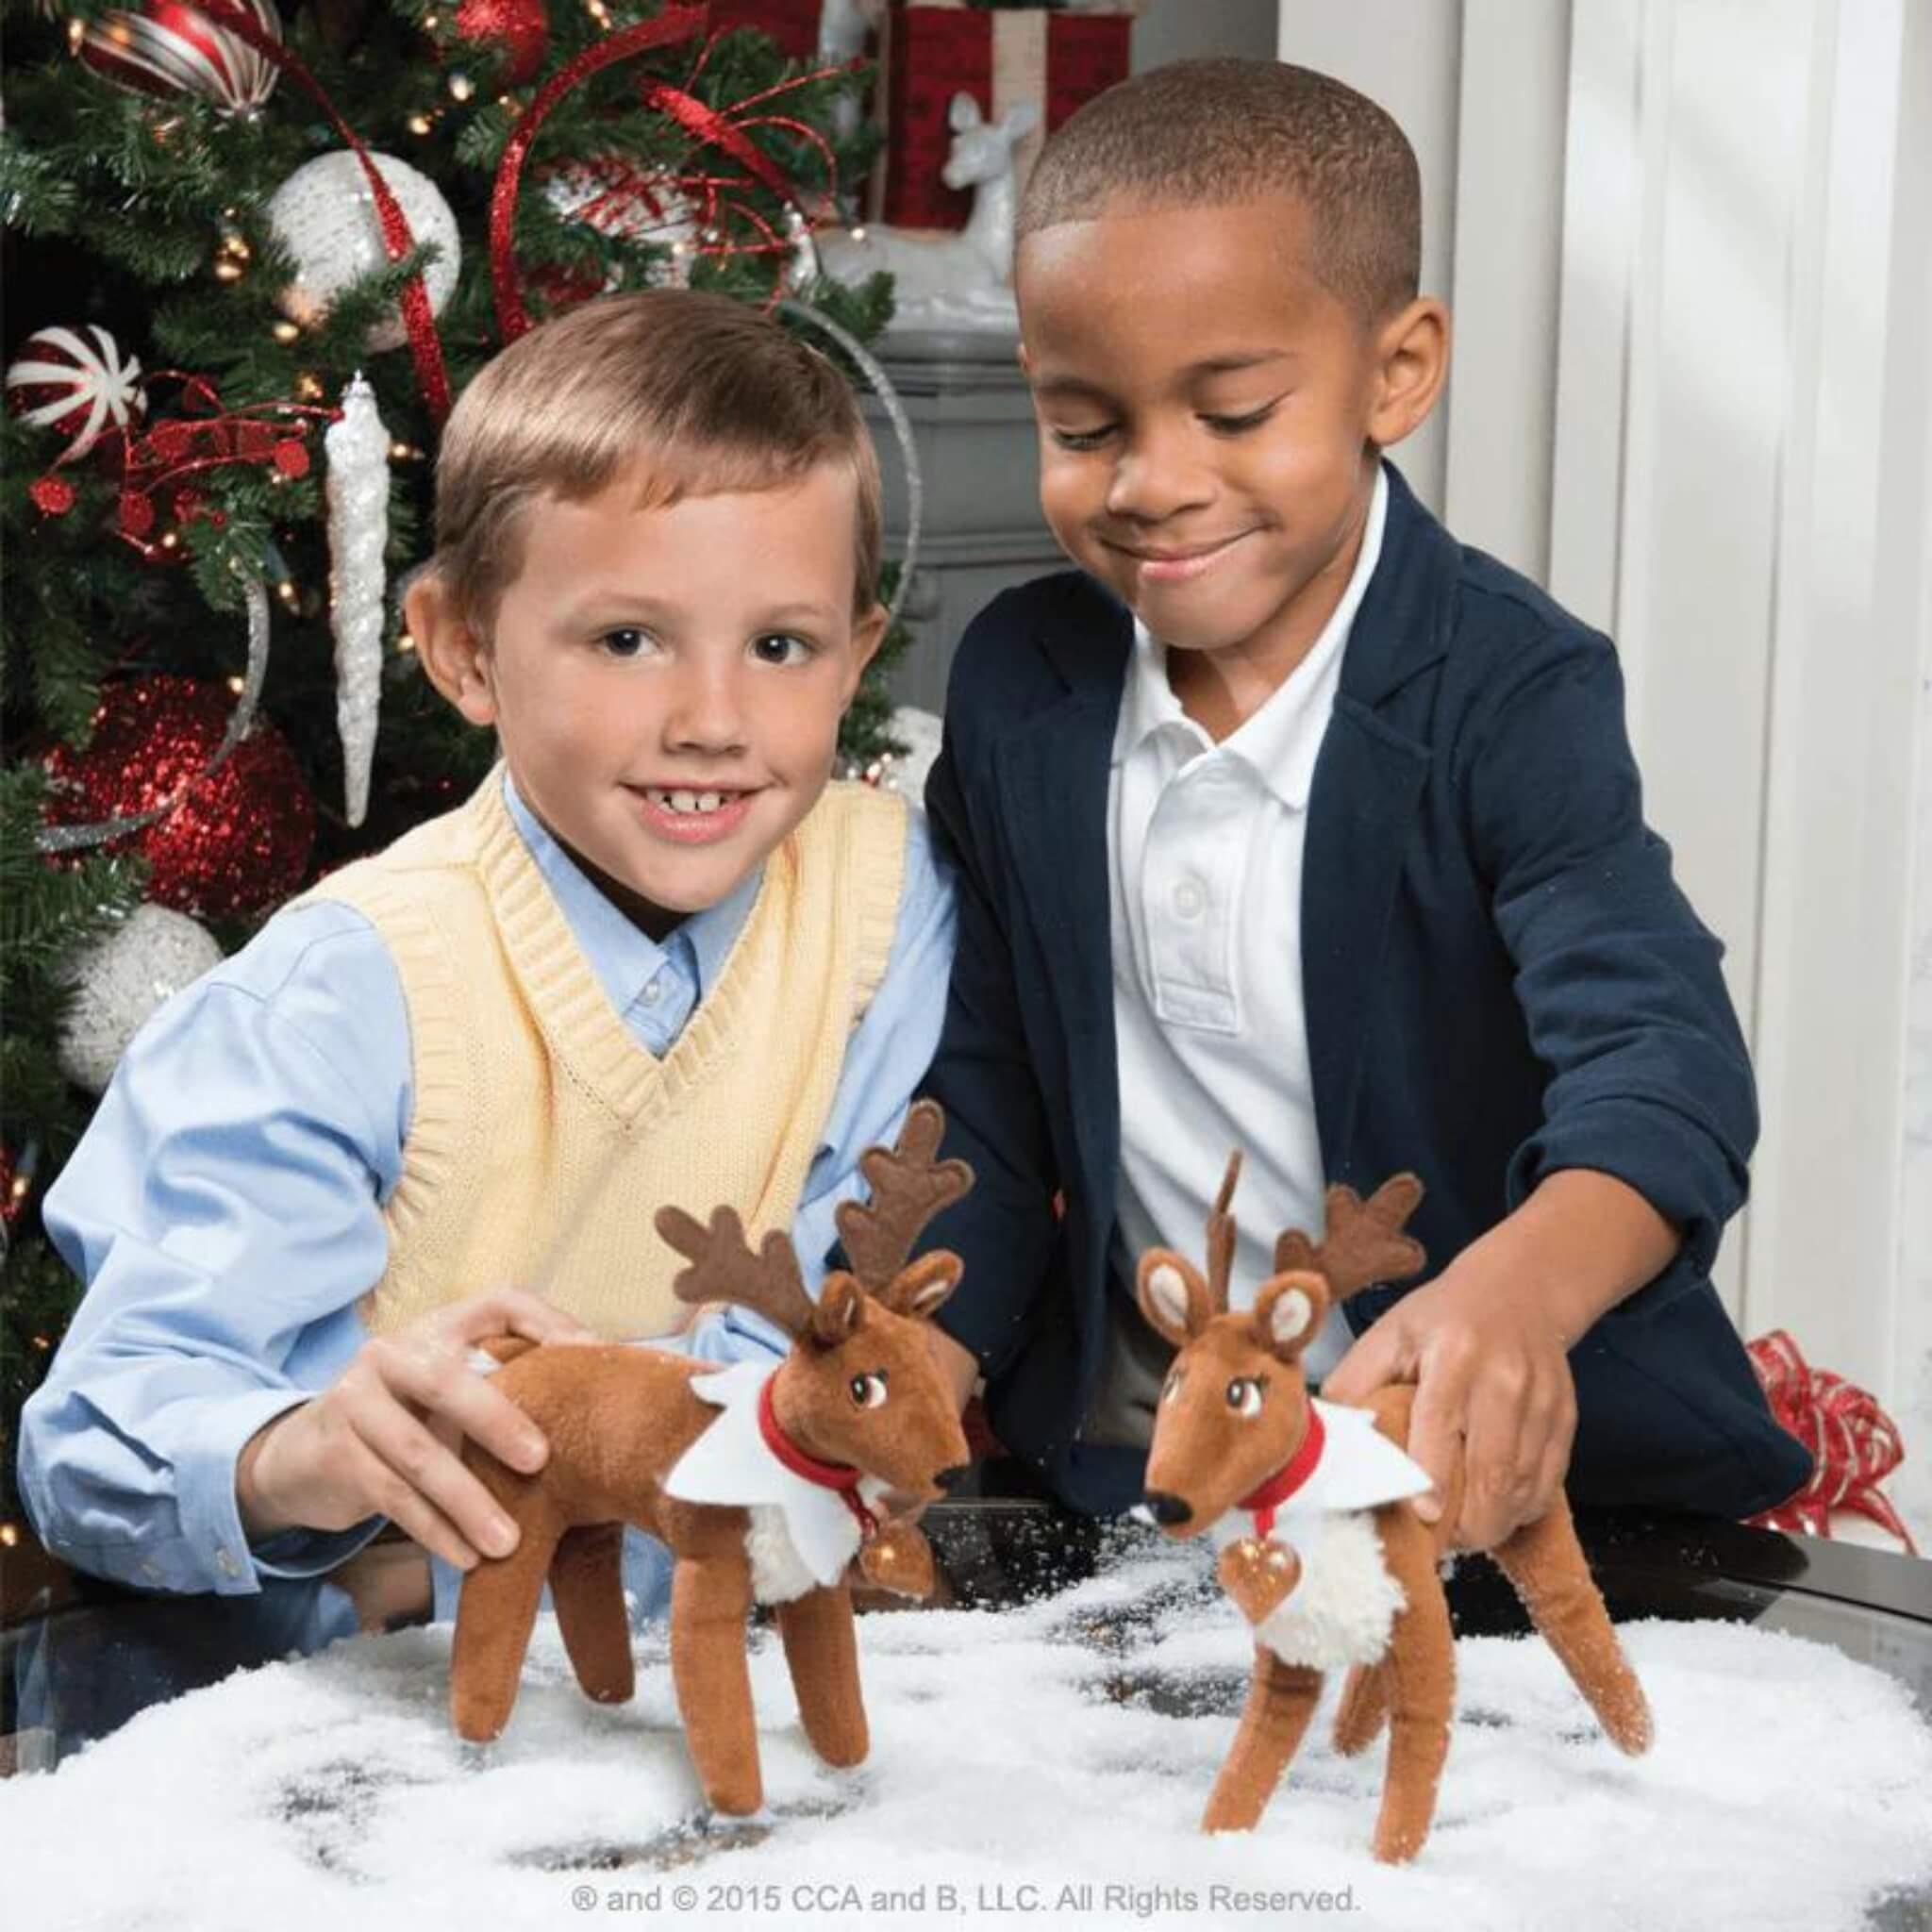 Elf Pets®: A Reindeer Tradition - The Elf on The Shelf